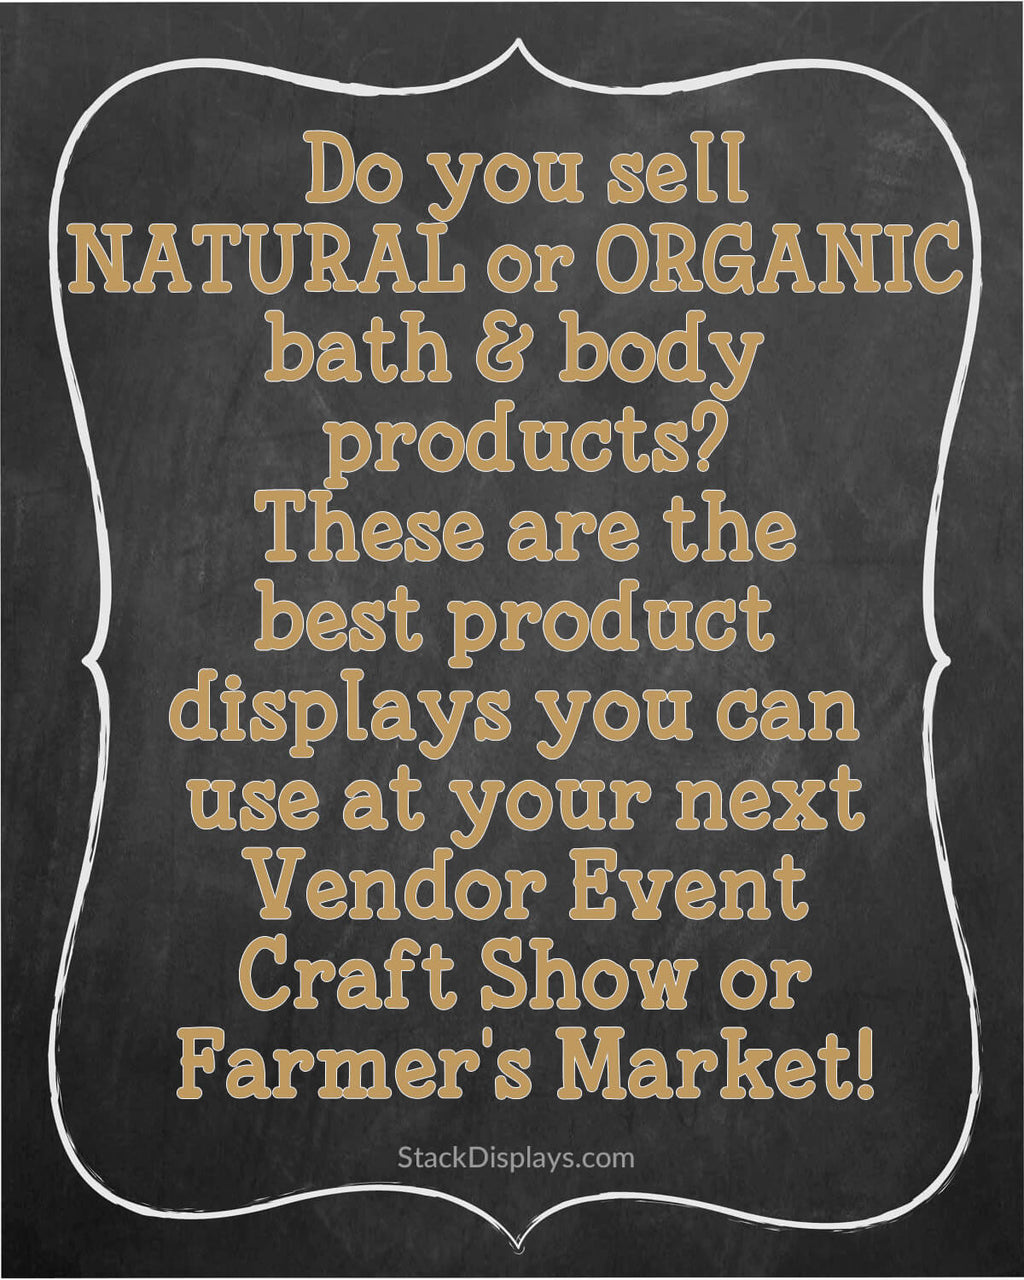 The Best Type of Displays to Use at Vendor Events & Craft Shows for Natural and Organic Products!